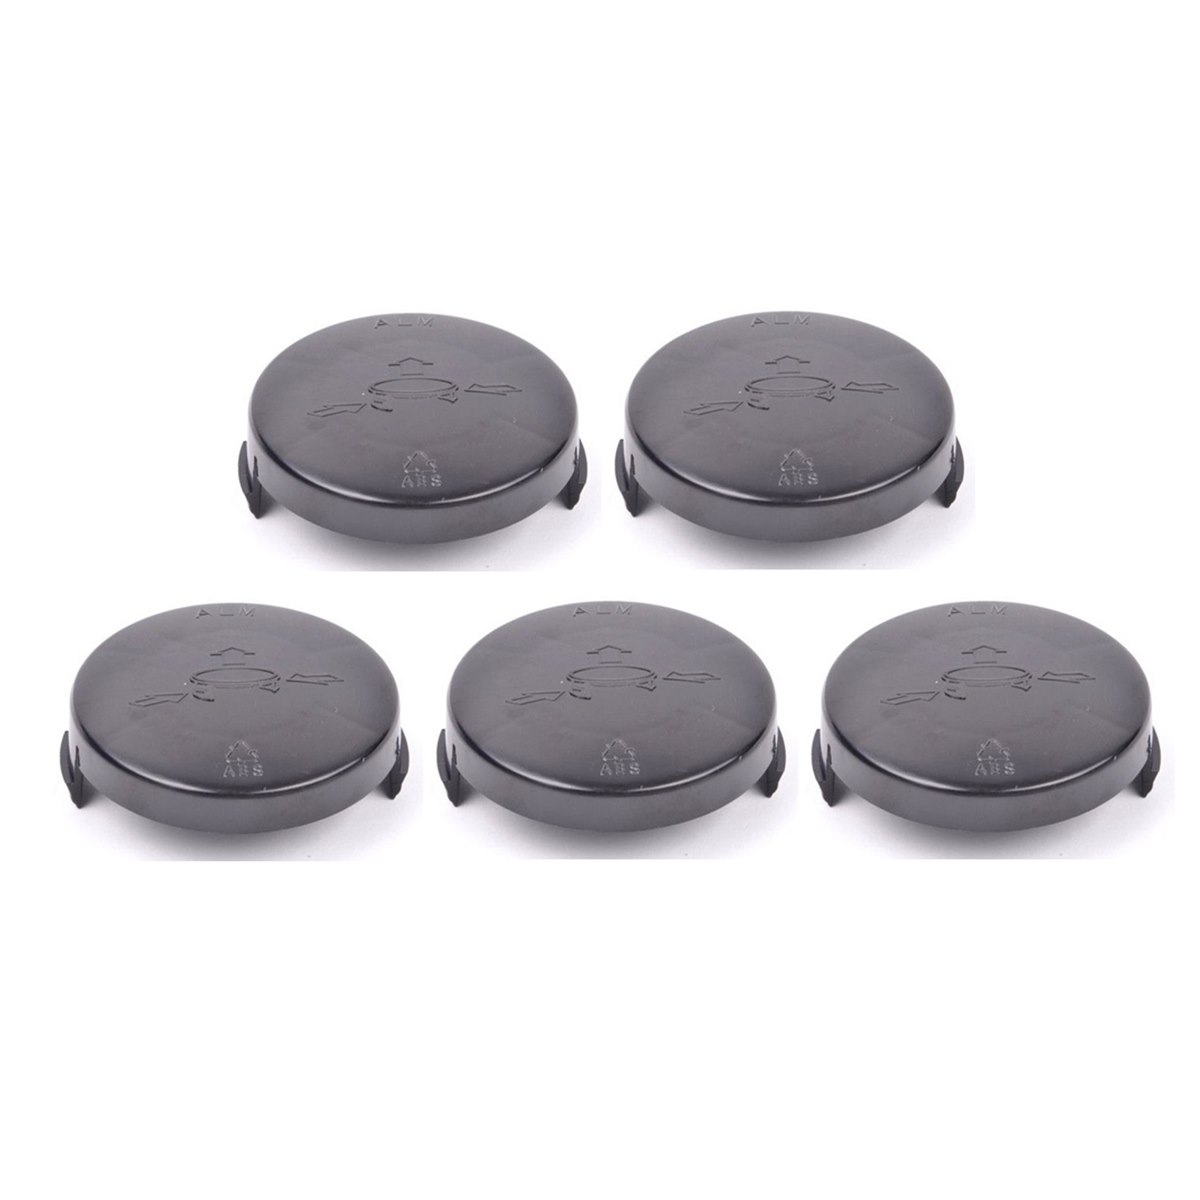 Case of 5 x ALM BD038 Spool Cover For Black and Decker GL575 and GL595